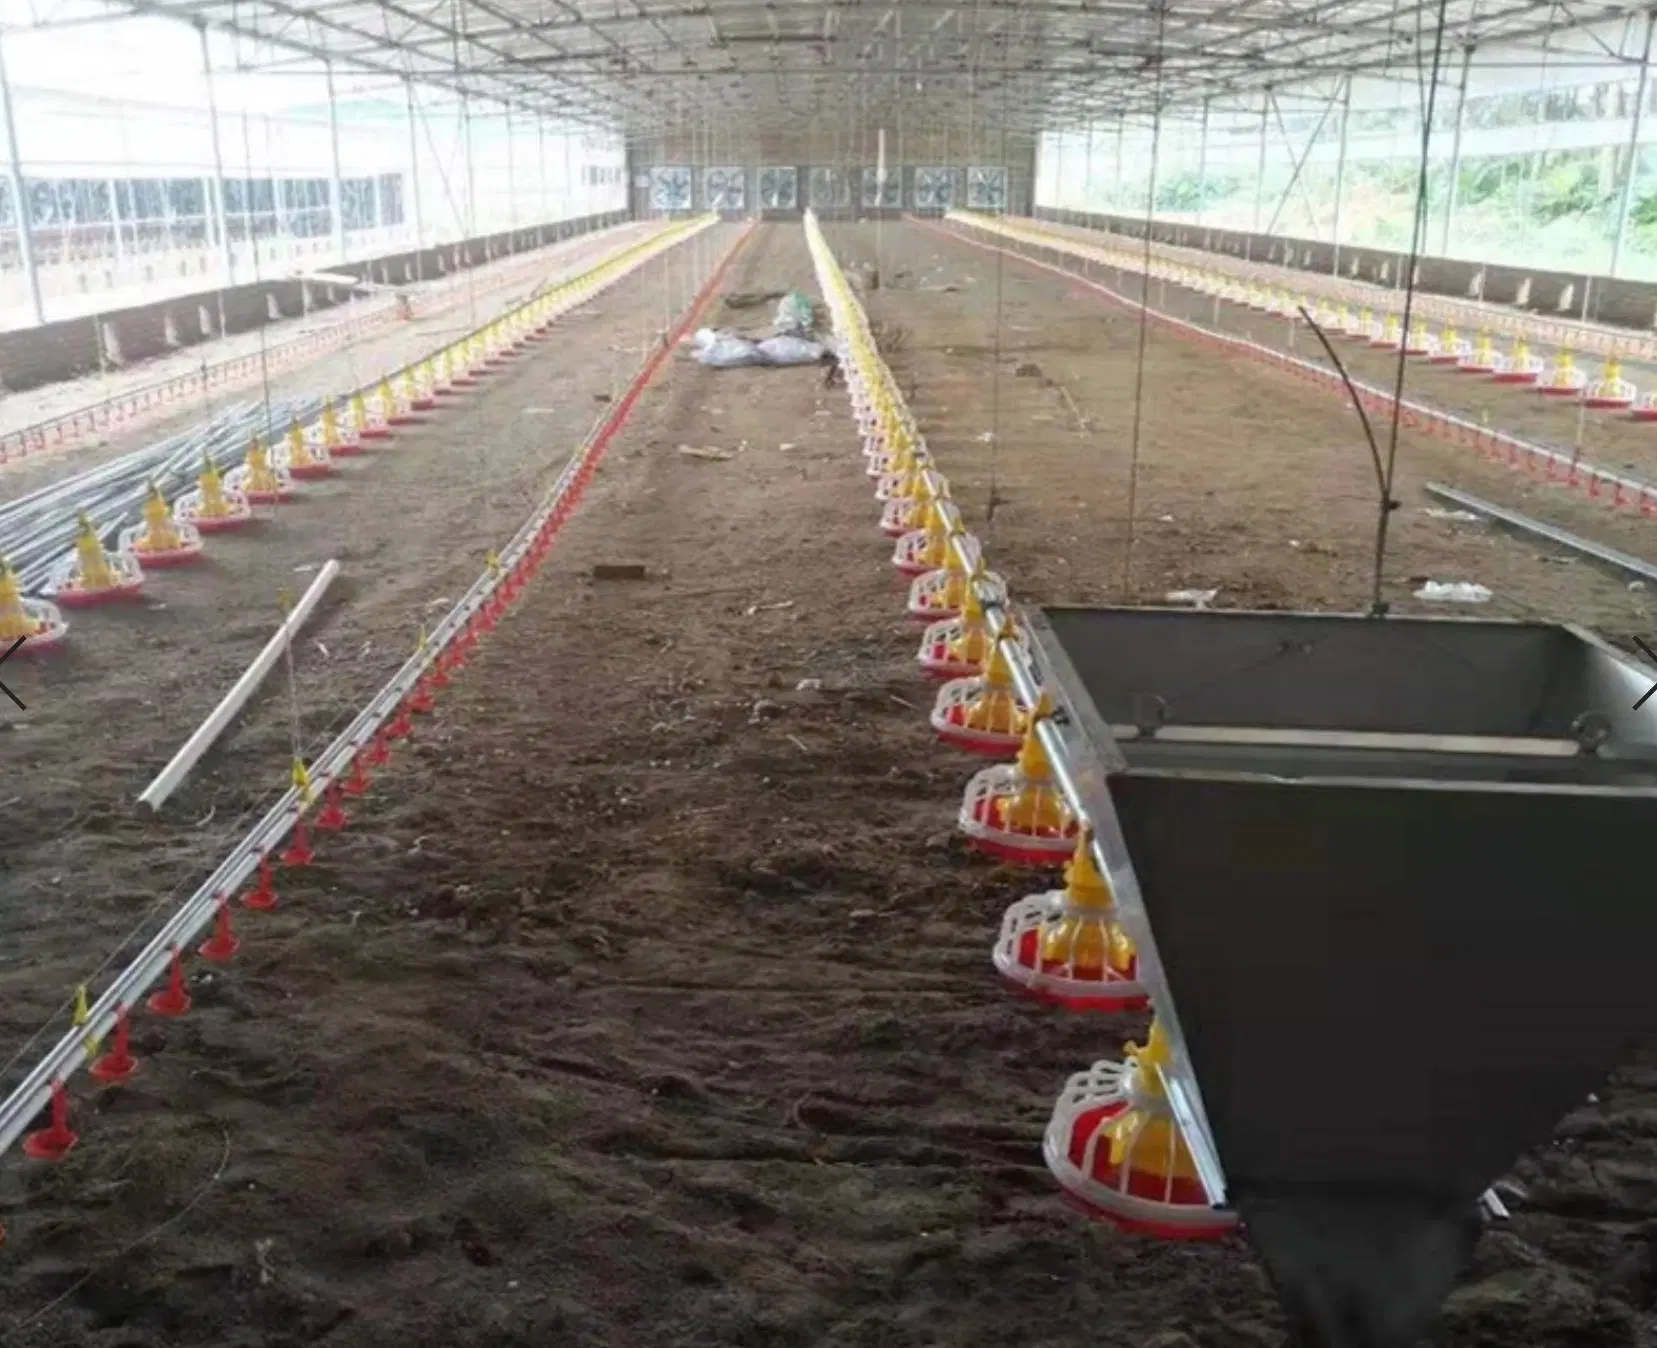 Automatic Chicken Farm Poultry Cage System Hot Galvanized /Battery Layer Poultry Cage for Broiler/Poultry Farm